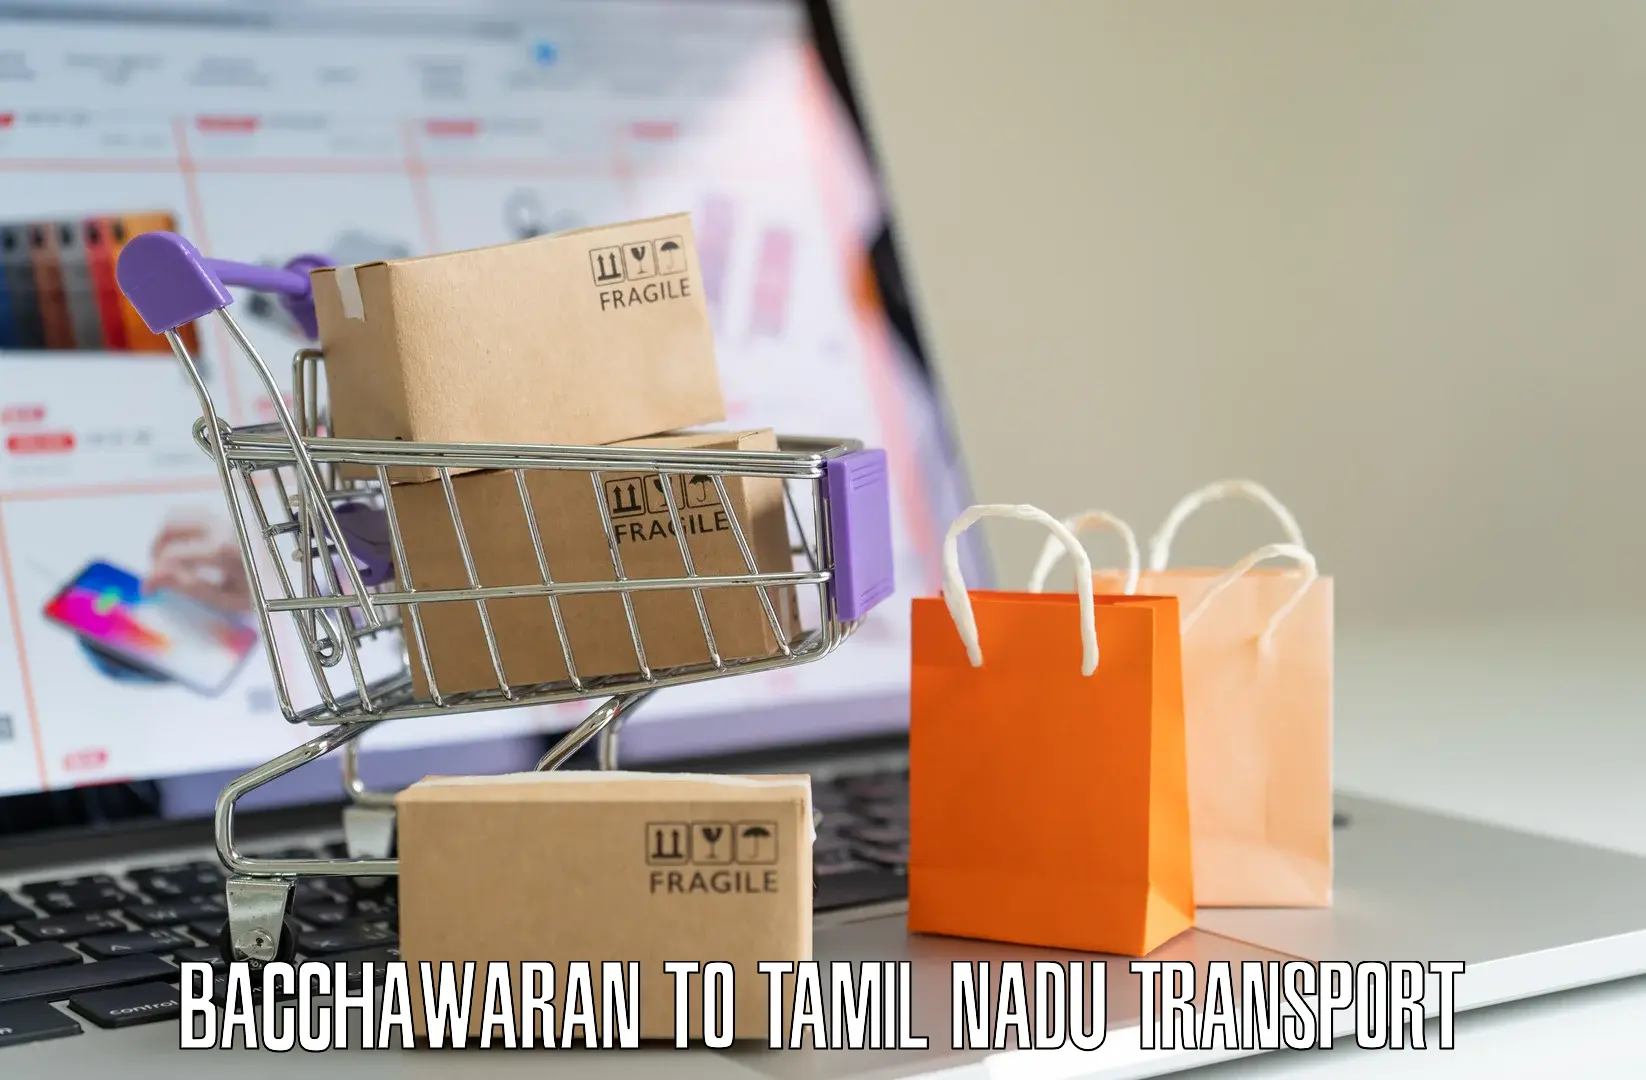 Parcel transport services Bacchawaran to Annur